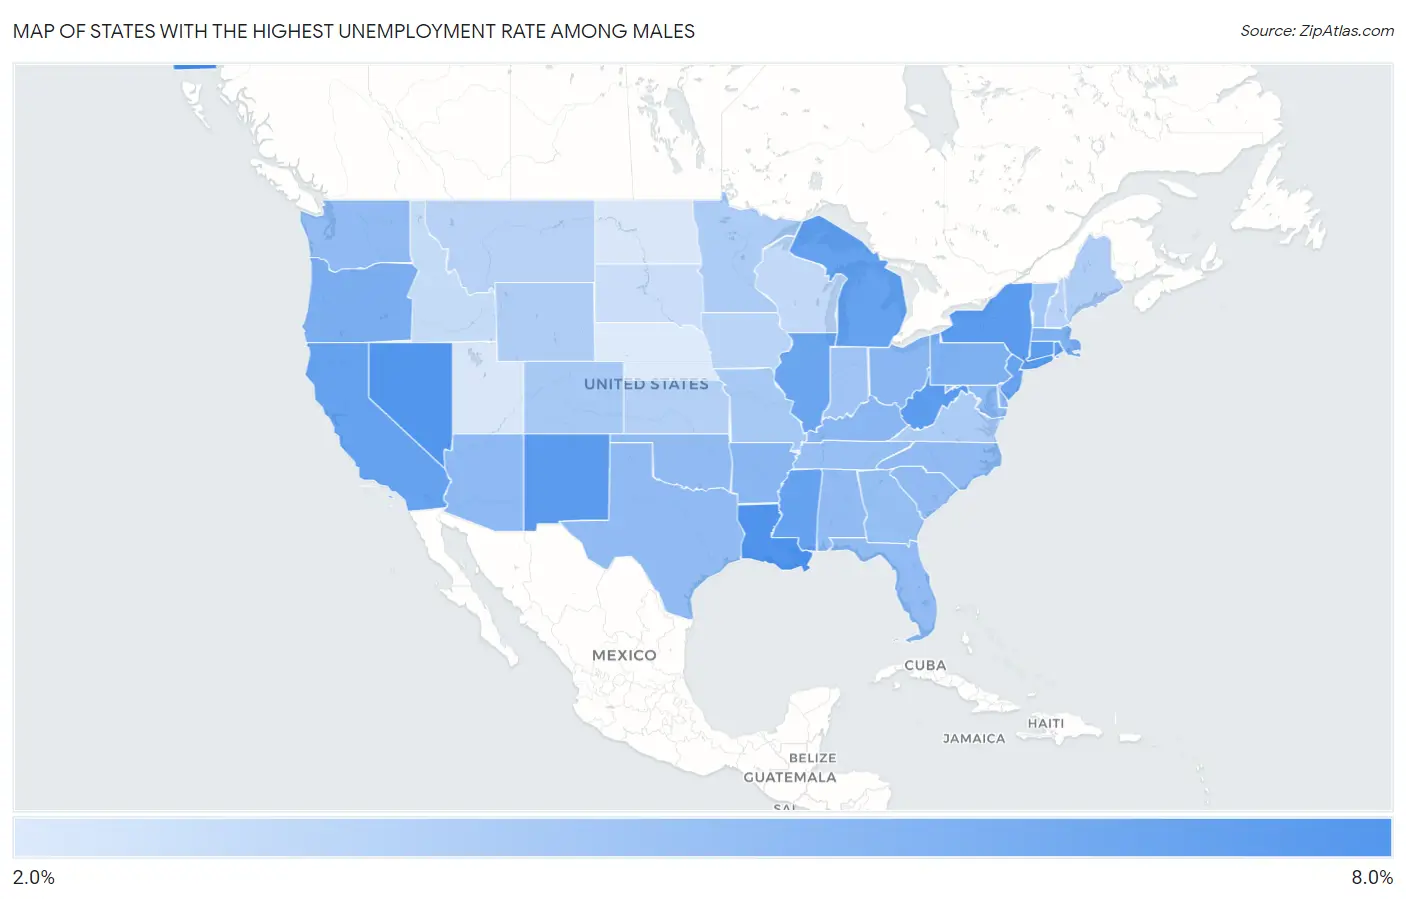 States with the Highest Unemployment Rate Among Males in the United States Map